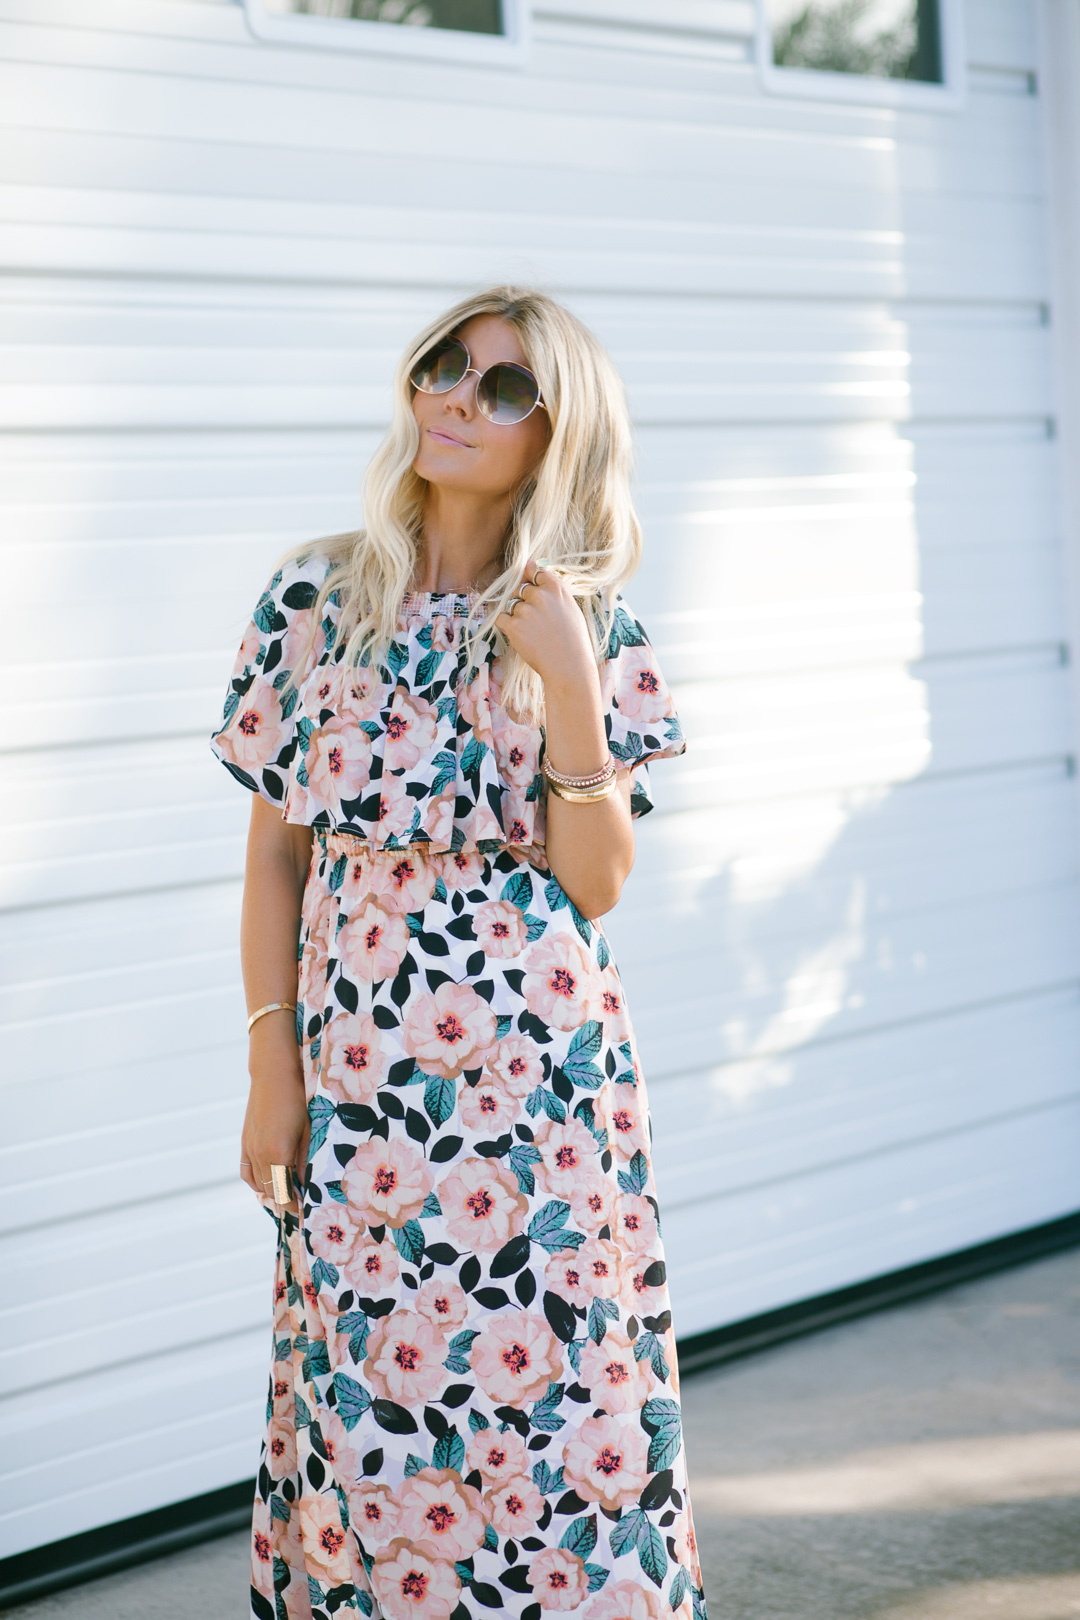 Lisa Allen of Lunchpails and Lipstick wearing a floral maxi dress by Show me your mumu and prada platforms in Encinitas, CA 